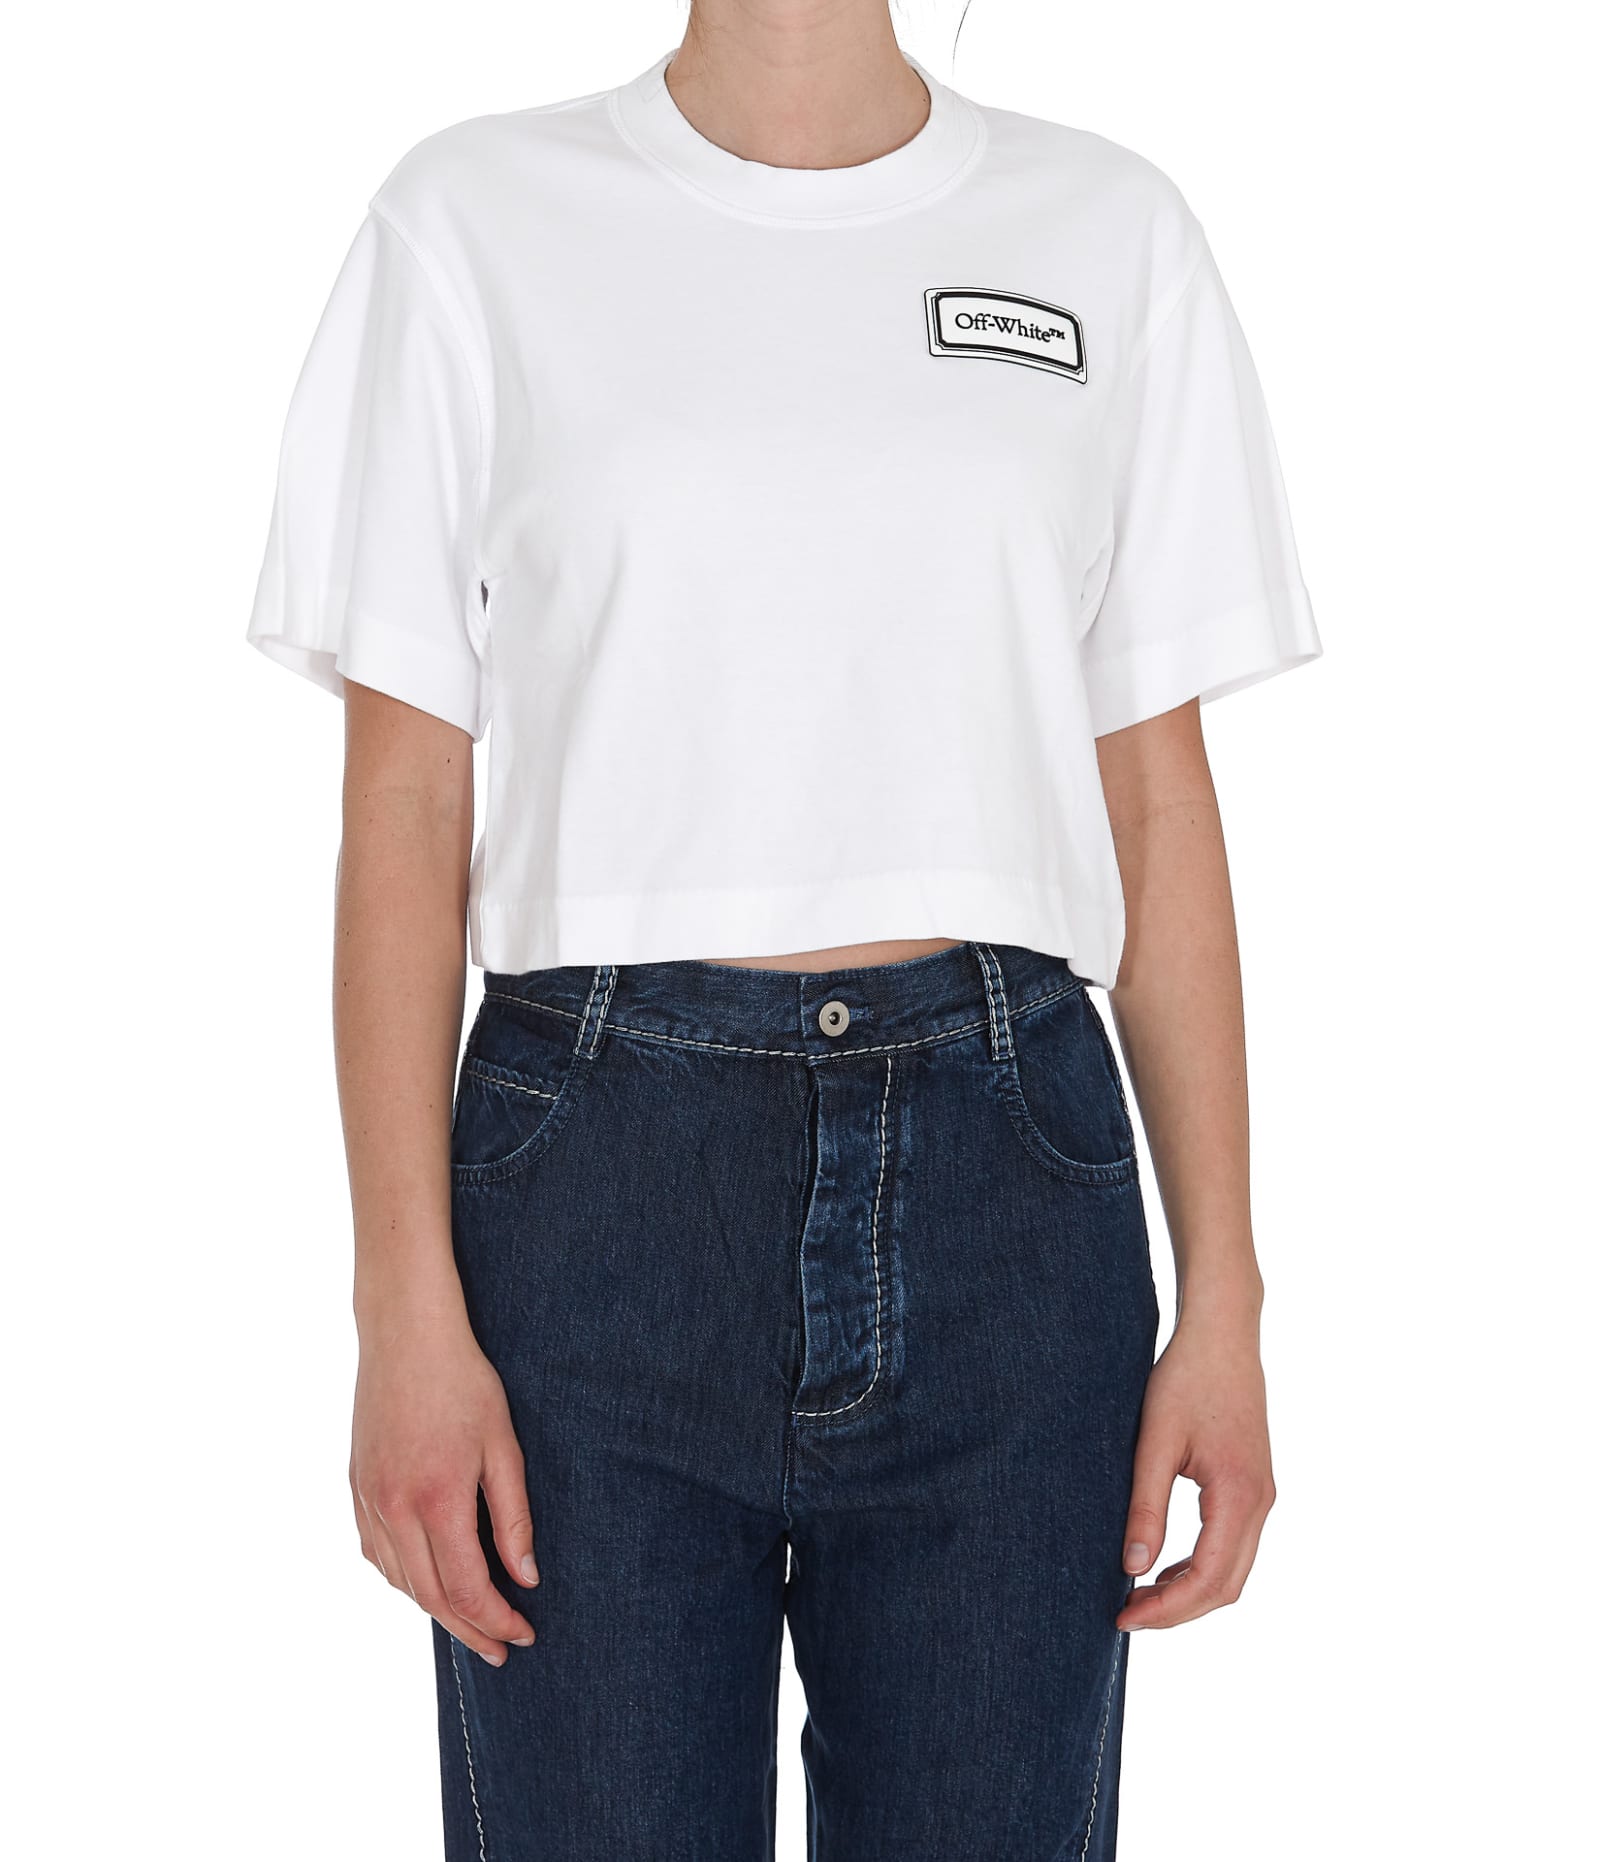 OFF-WHITE OFF-WHITE LOGO CROPPED T-SHIRT,OWAA090S21JER004 0110